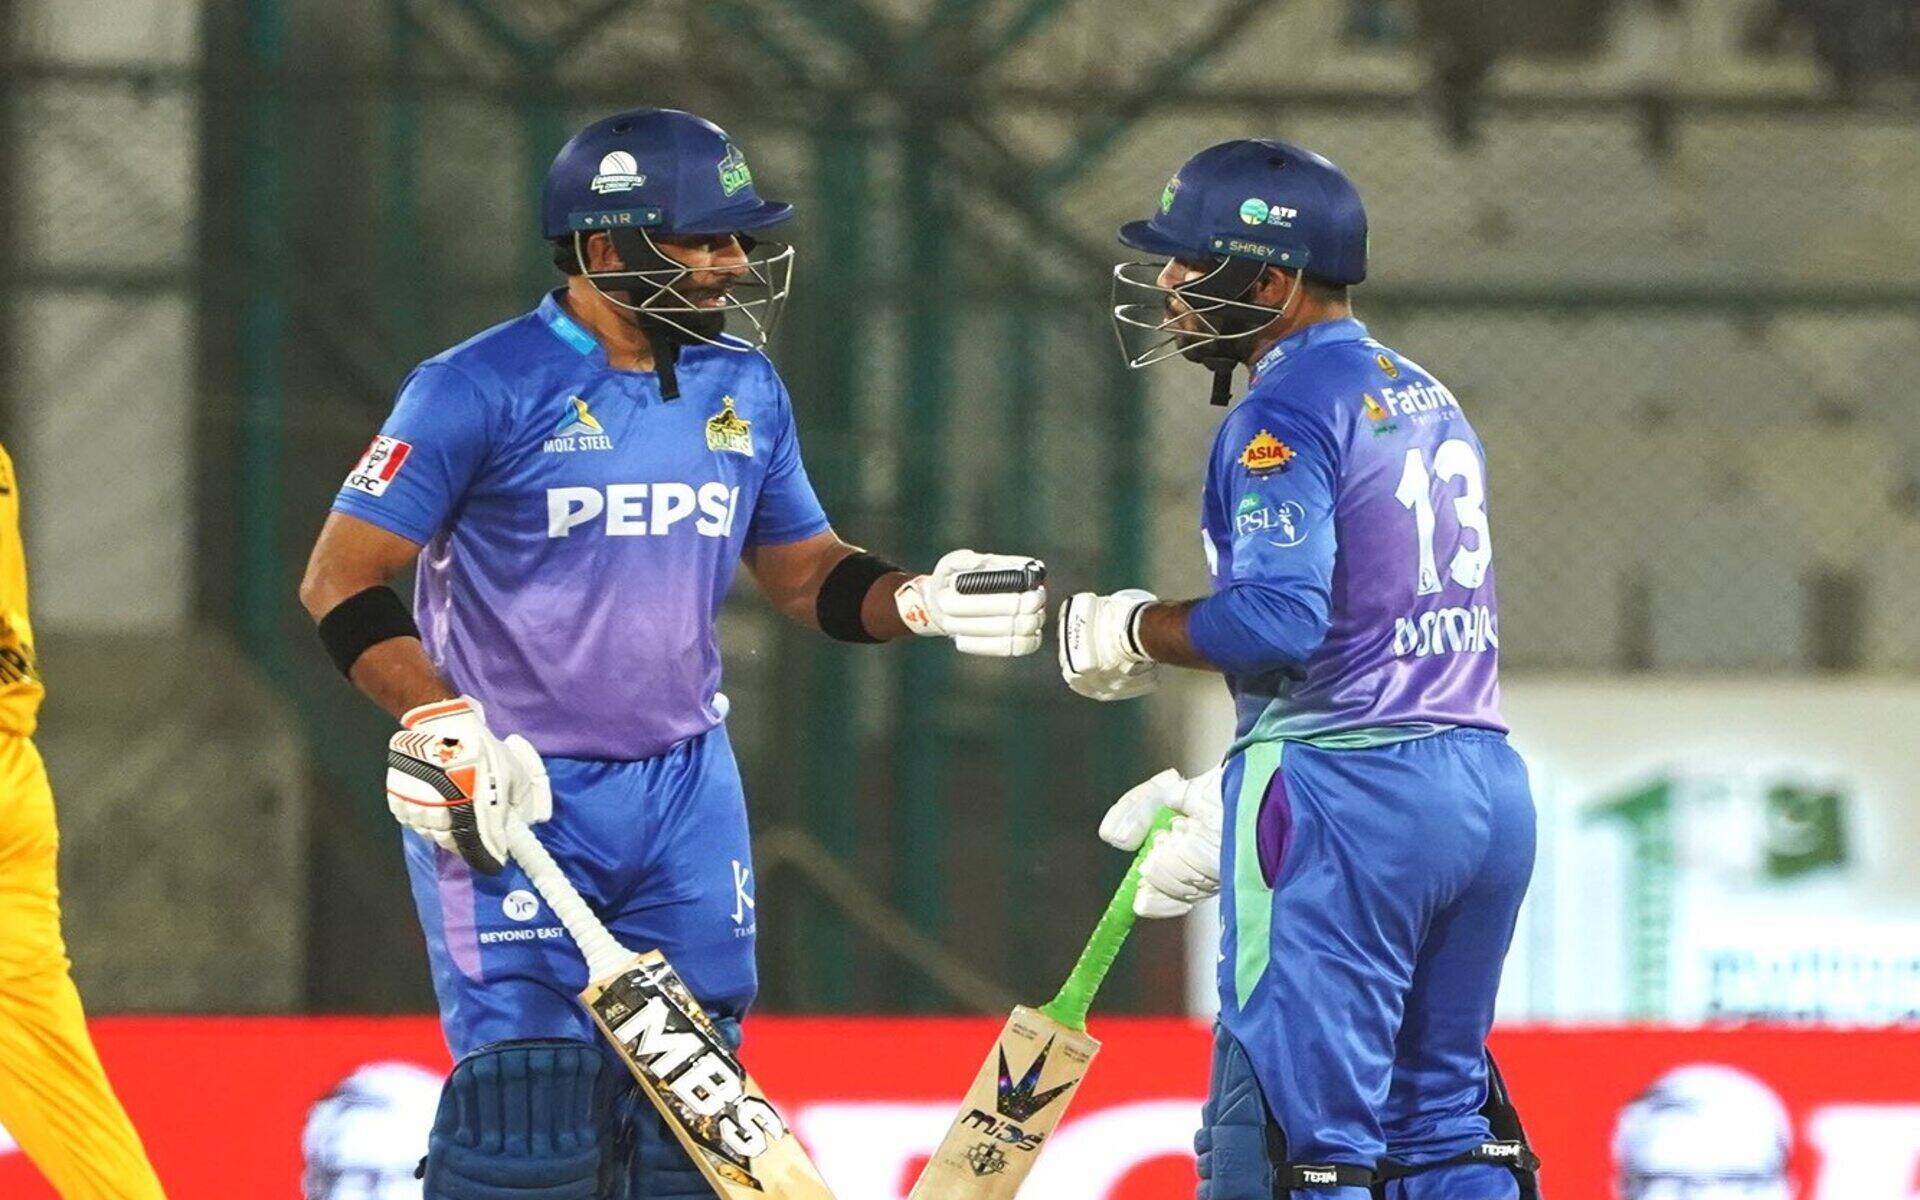 Iftikhar Ahmed and Usman Khan played till the end for Multan (Source: PSL/PCB)